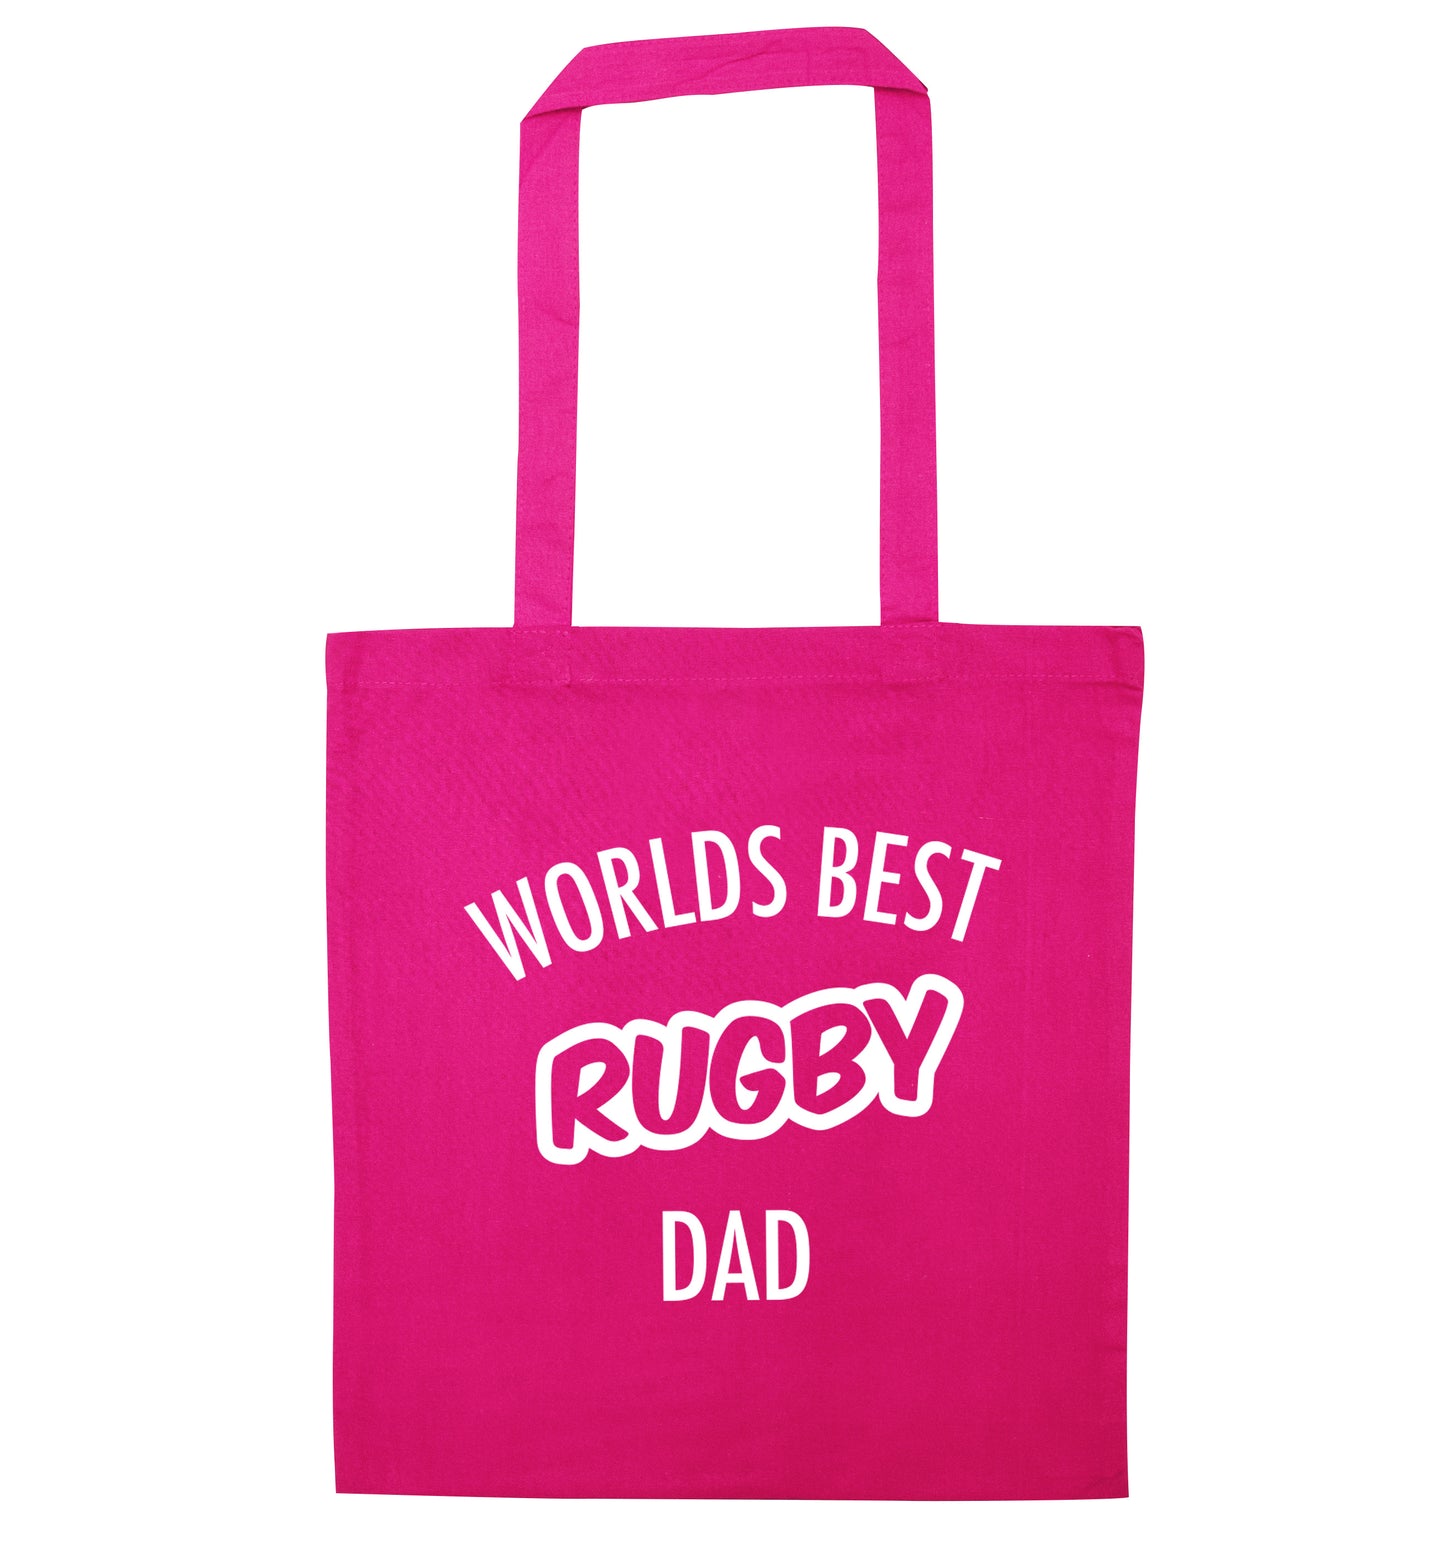 Worlds best rugby dad pink tote bag